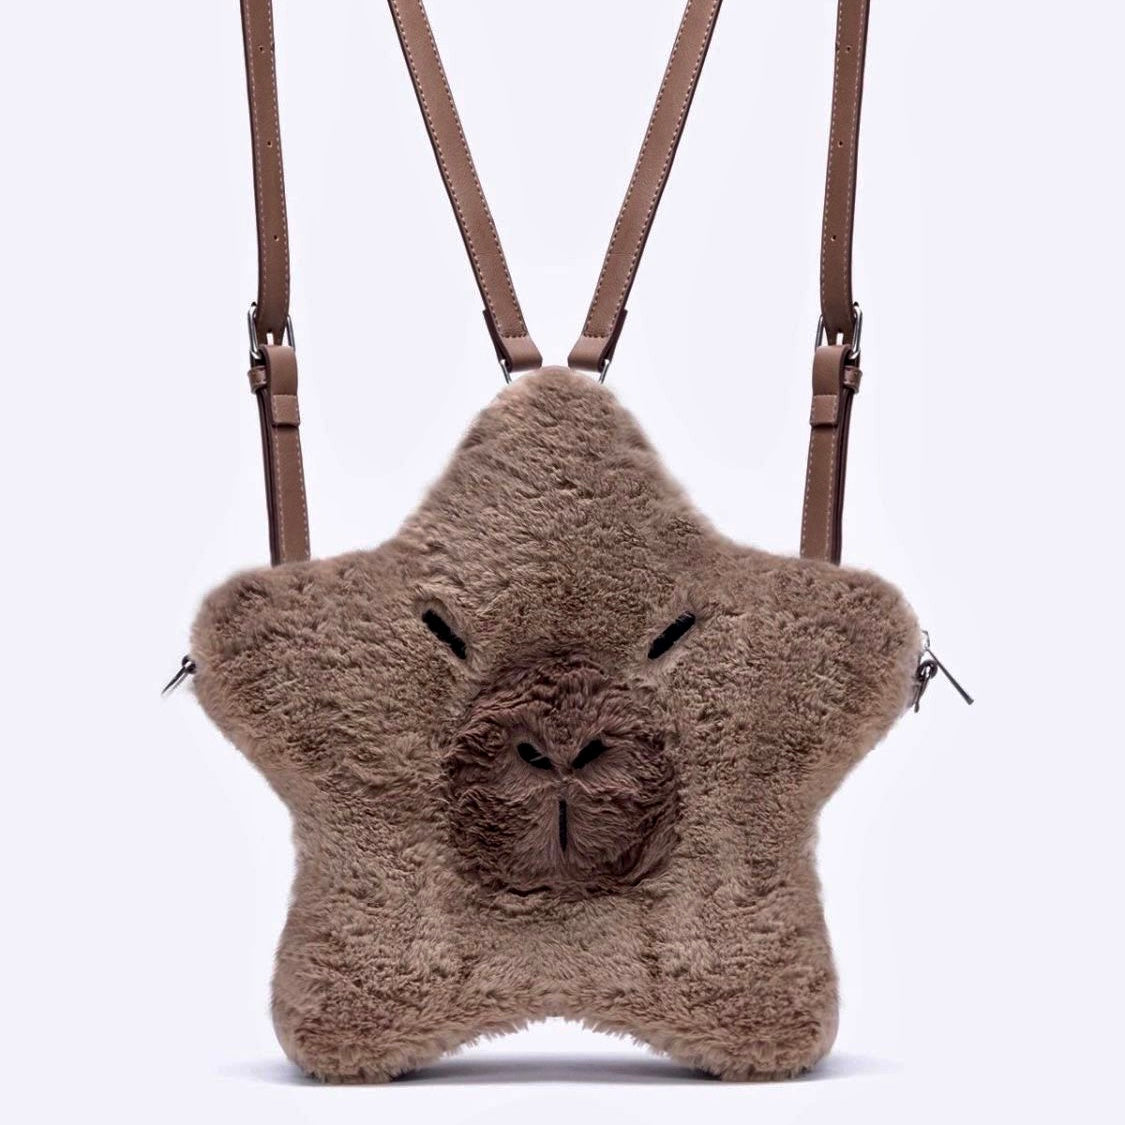 【Ahhkawaii】Original Capybara Cute, Ugly-Cute Plush Starry Backpack, New Arrival for Autumn and Winter